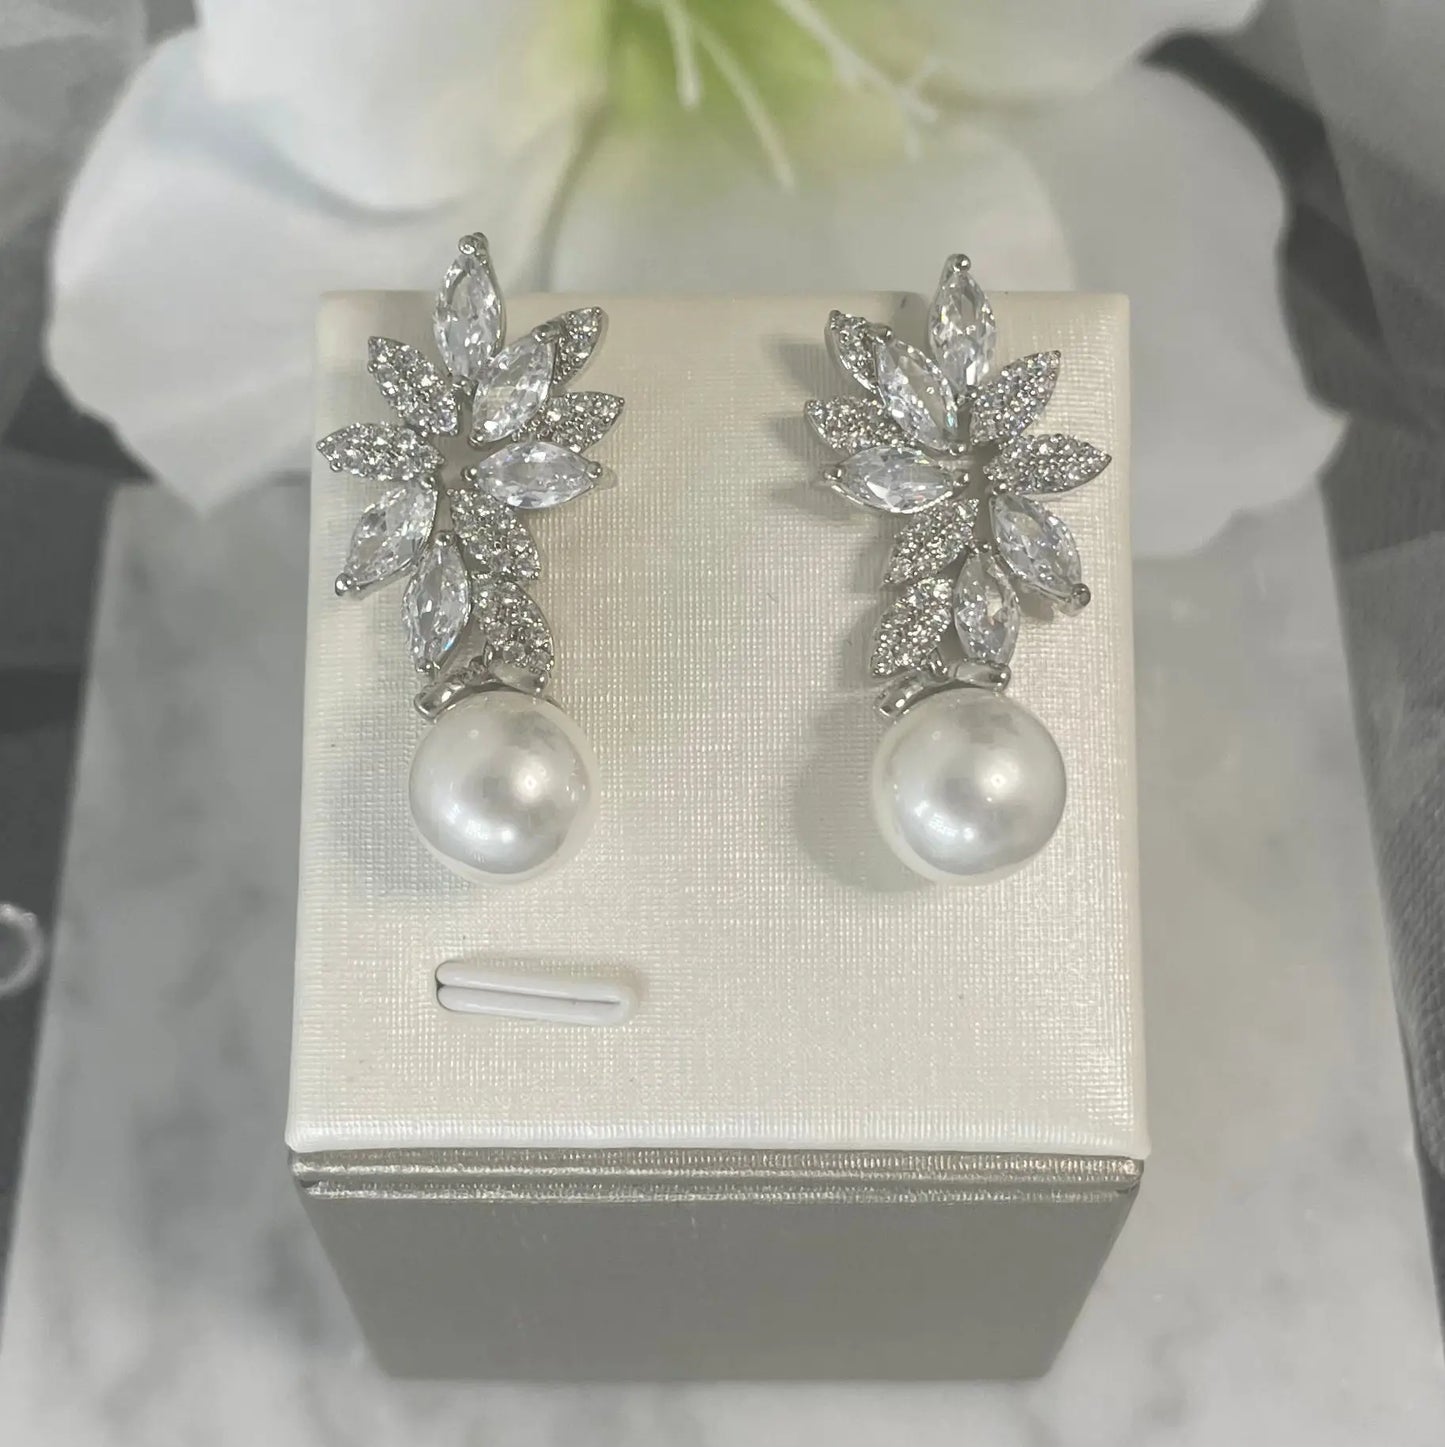 Indi crystal pearl earrings with floral and leaf motifs, featuring delicate crystals and a drop pearl, set in sterling silver, perfect for enhancing wedding and special occasion attire.